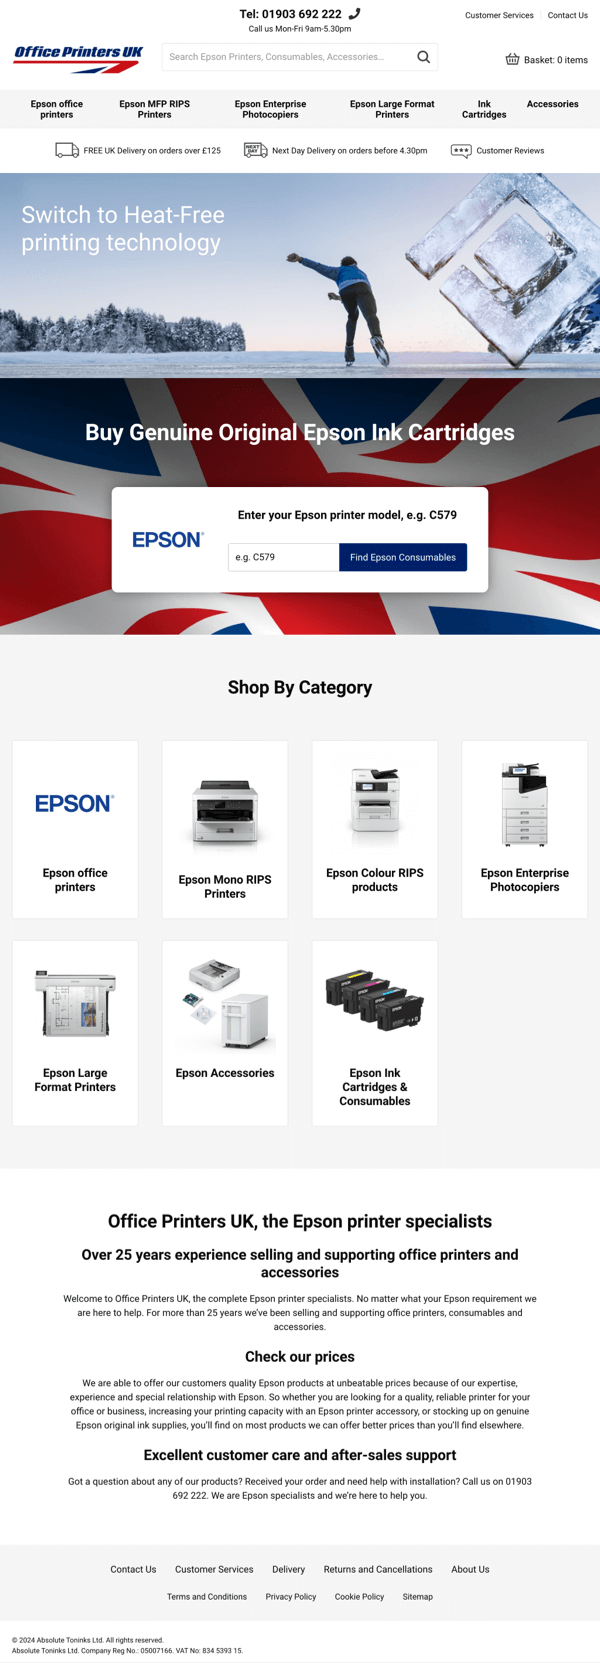 Office Printers UK (Website simulation on a tablet)